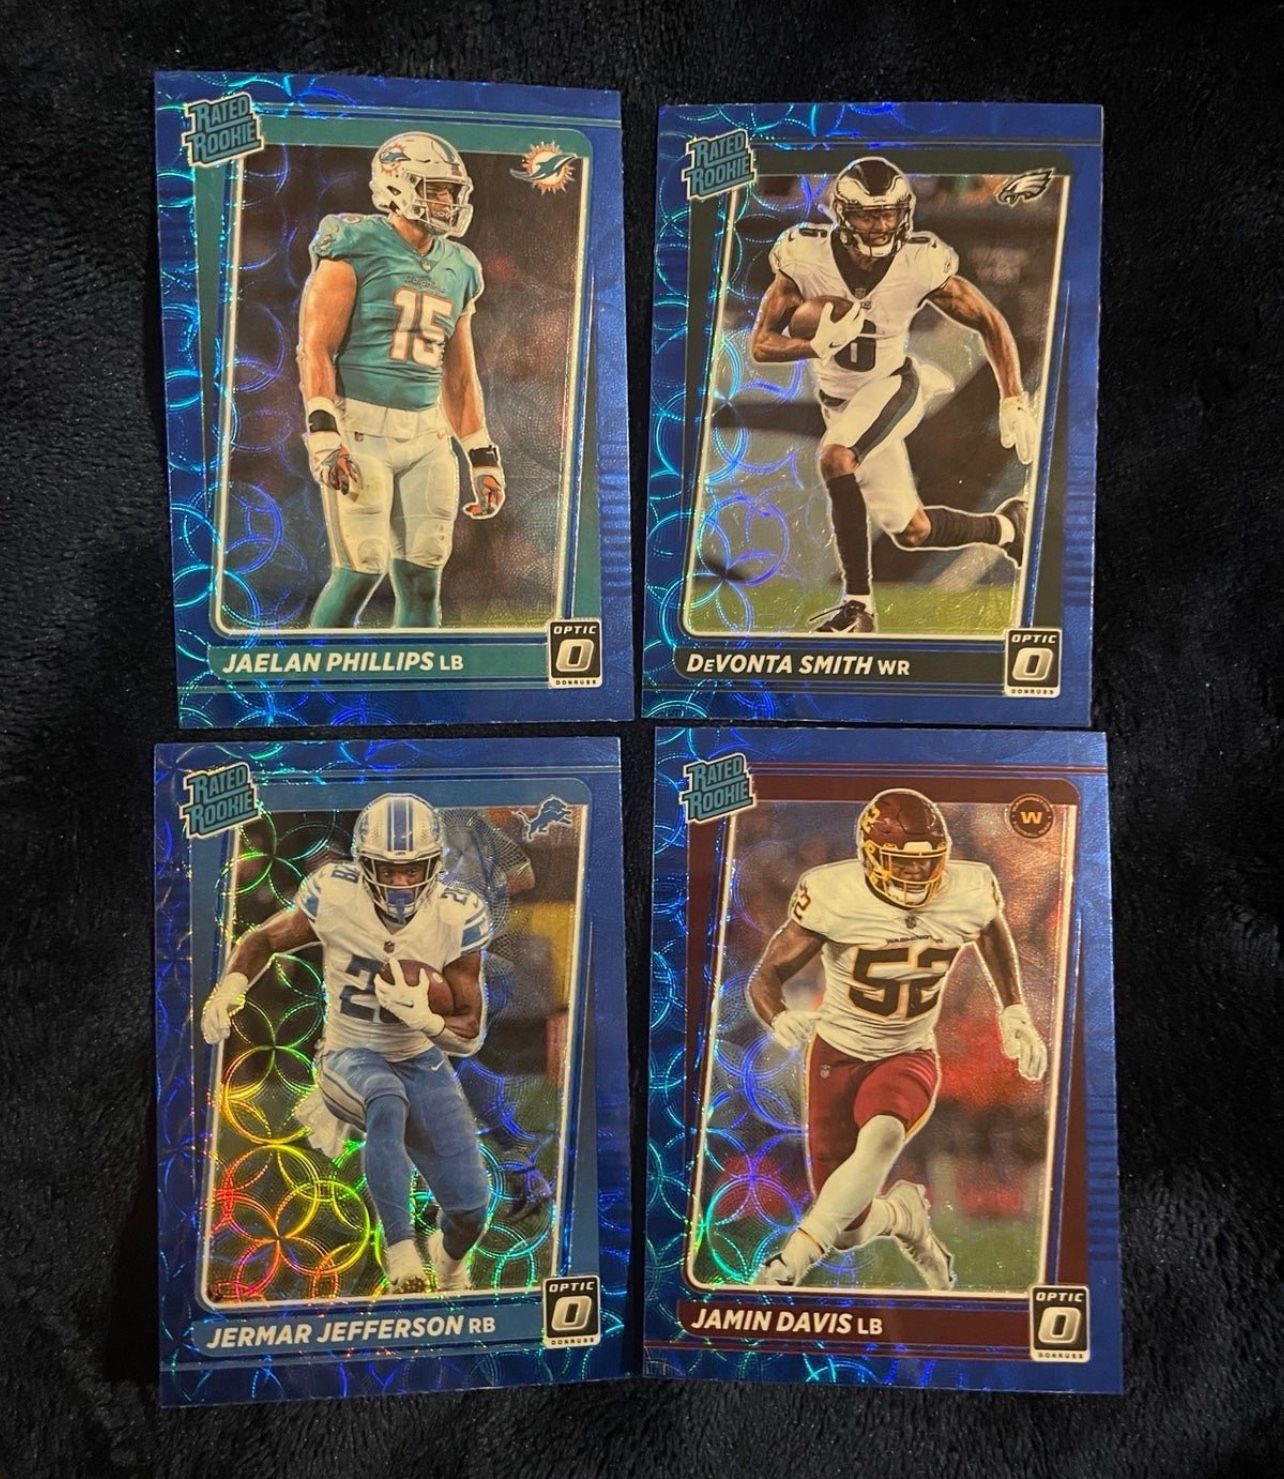 Rated Rookie Blue Scope Prizm Lot (16)